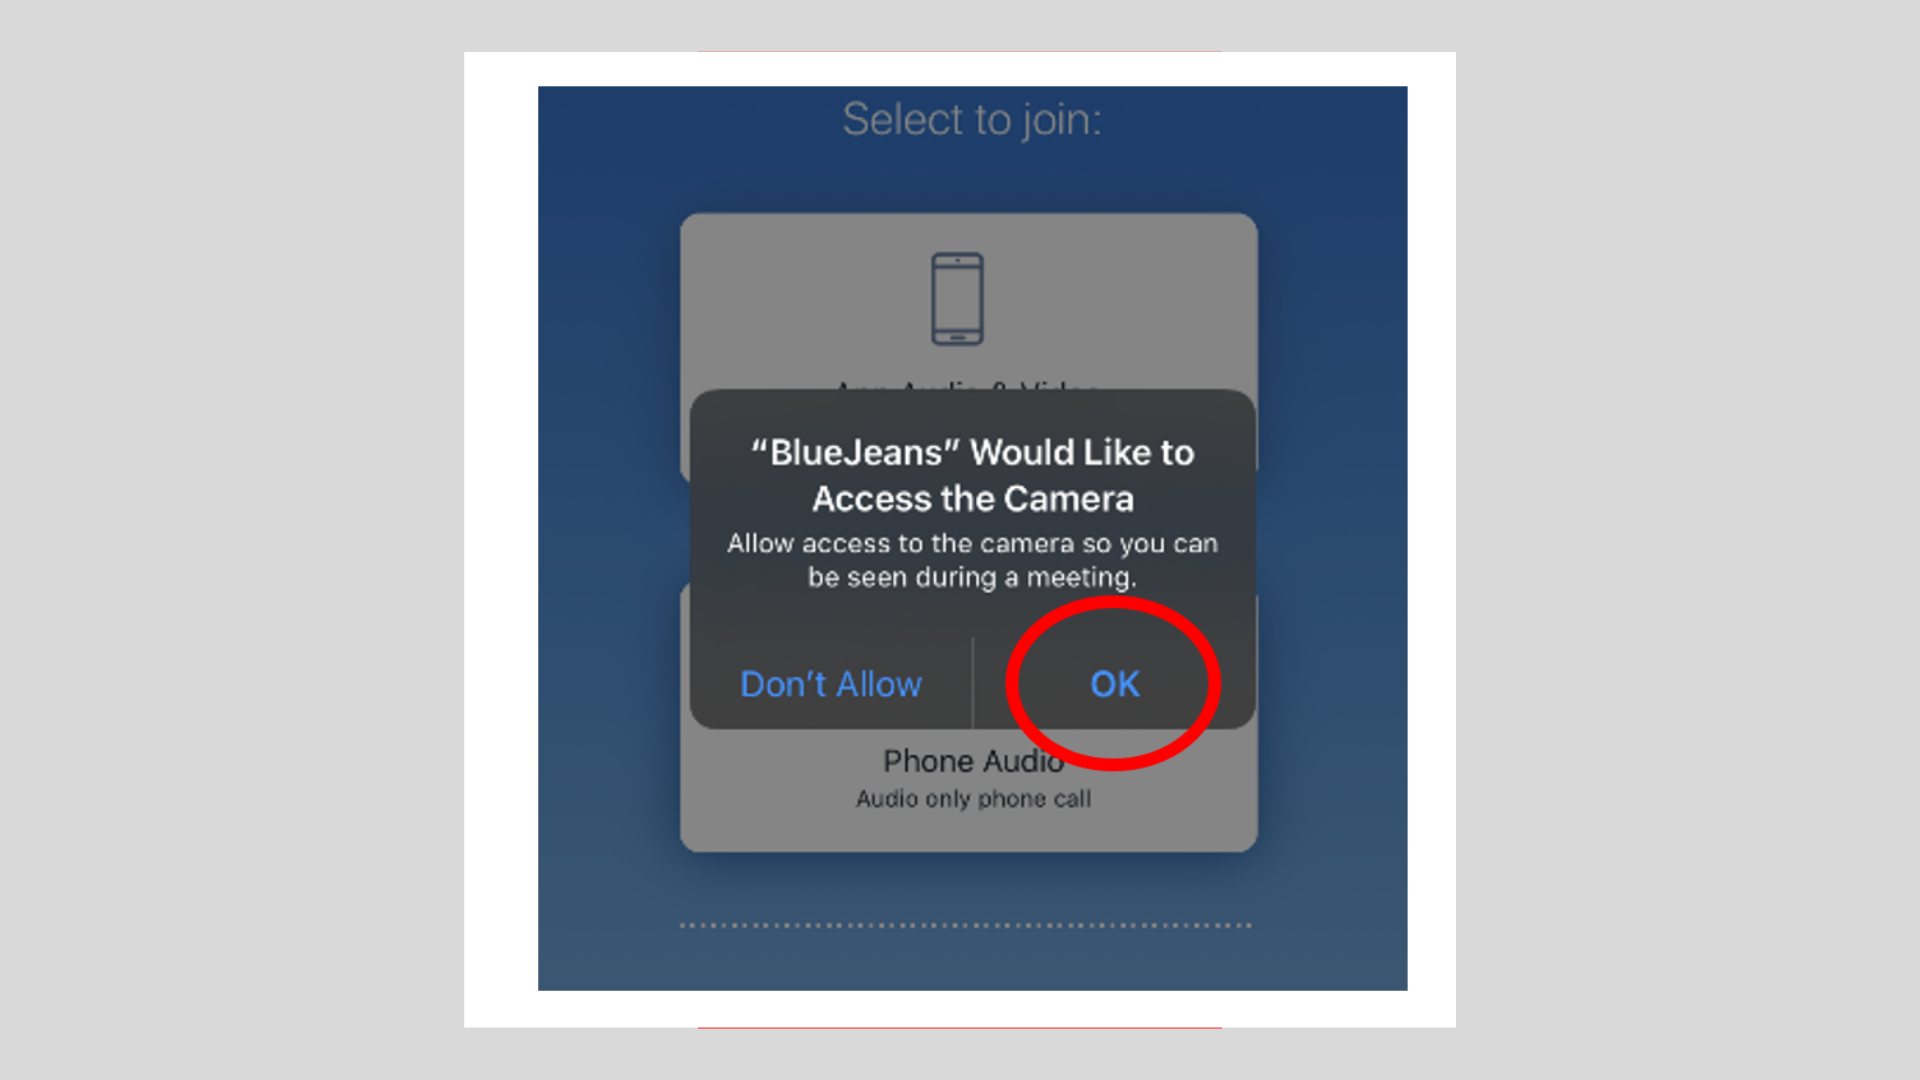 Image of the permission for camera access button